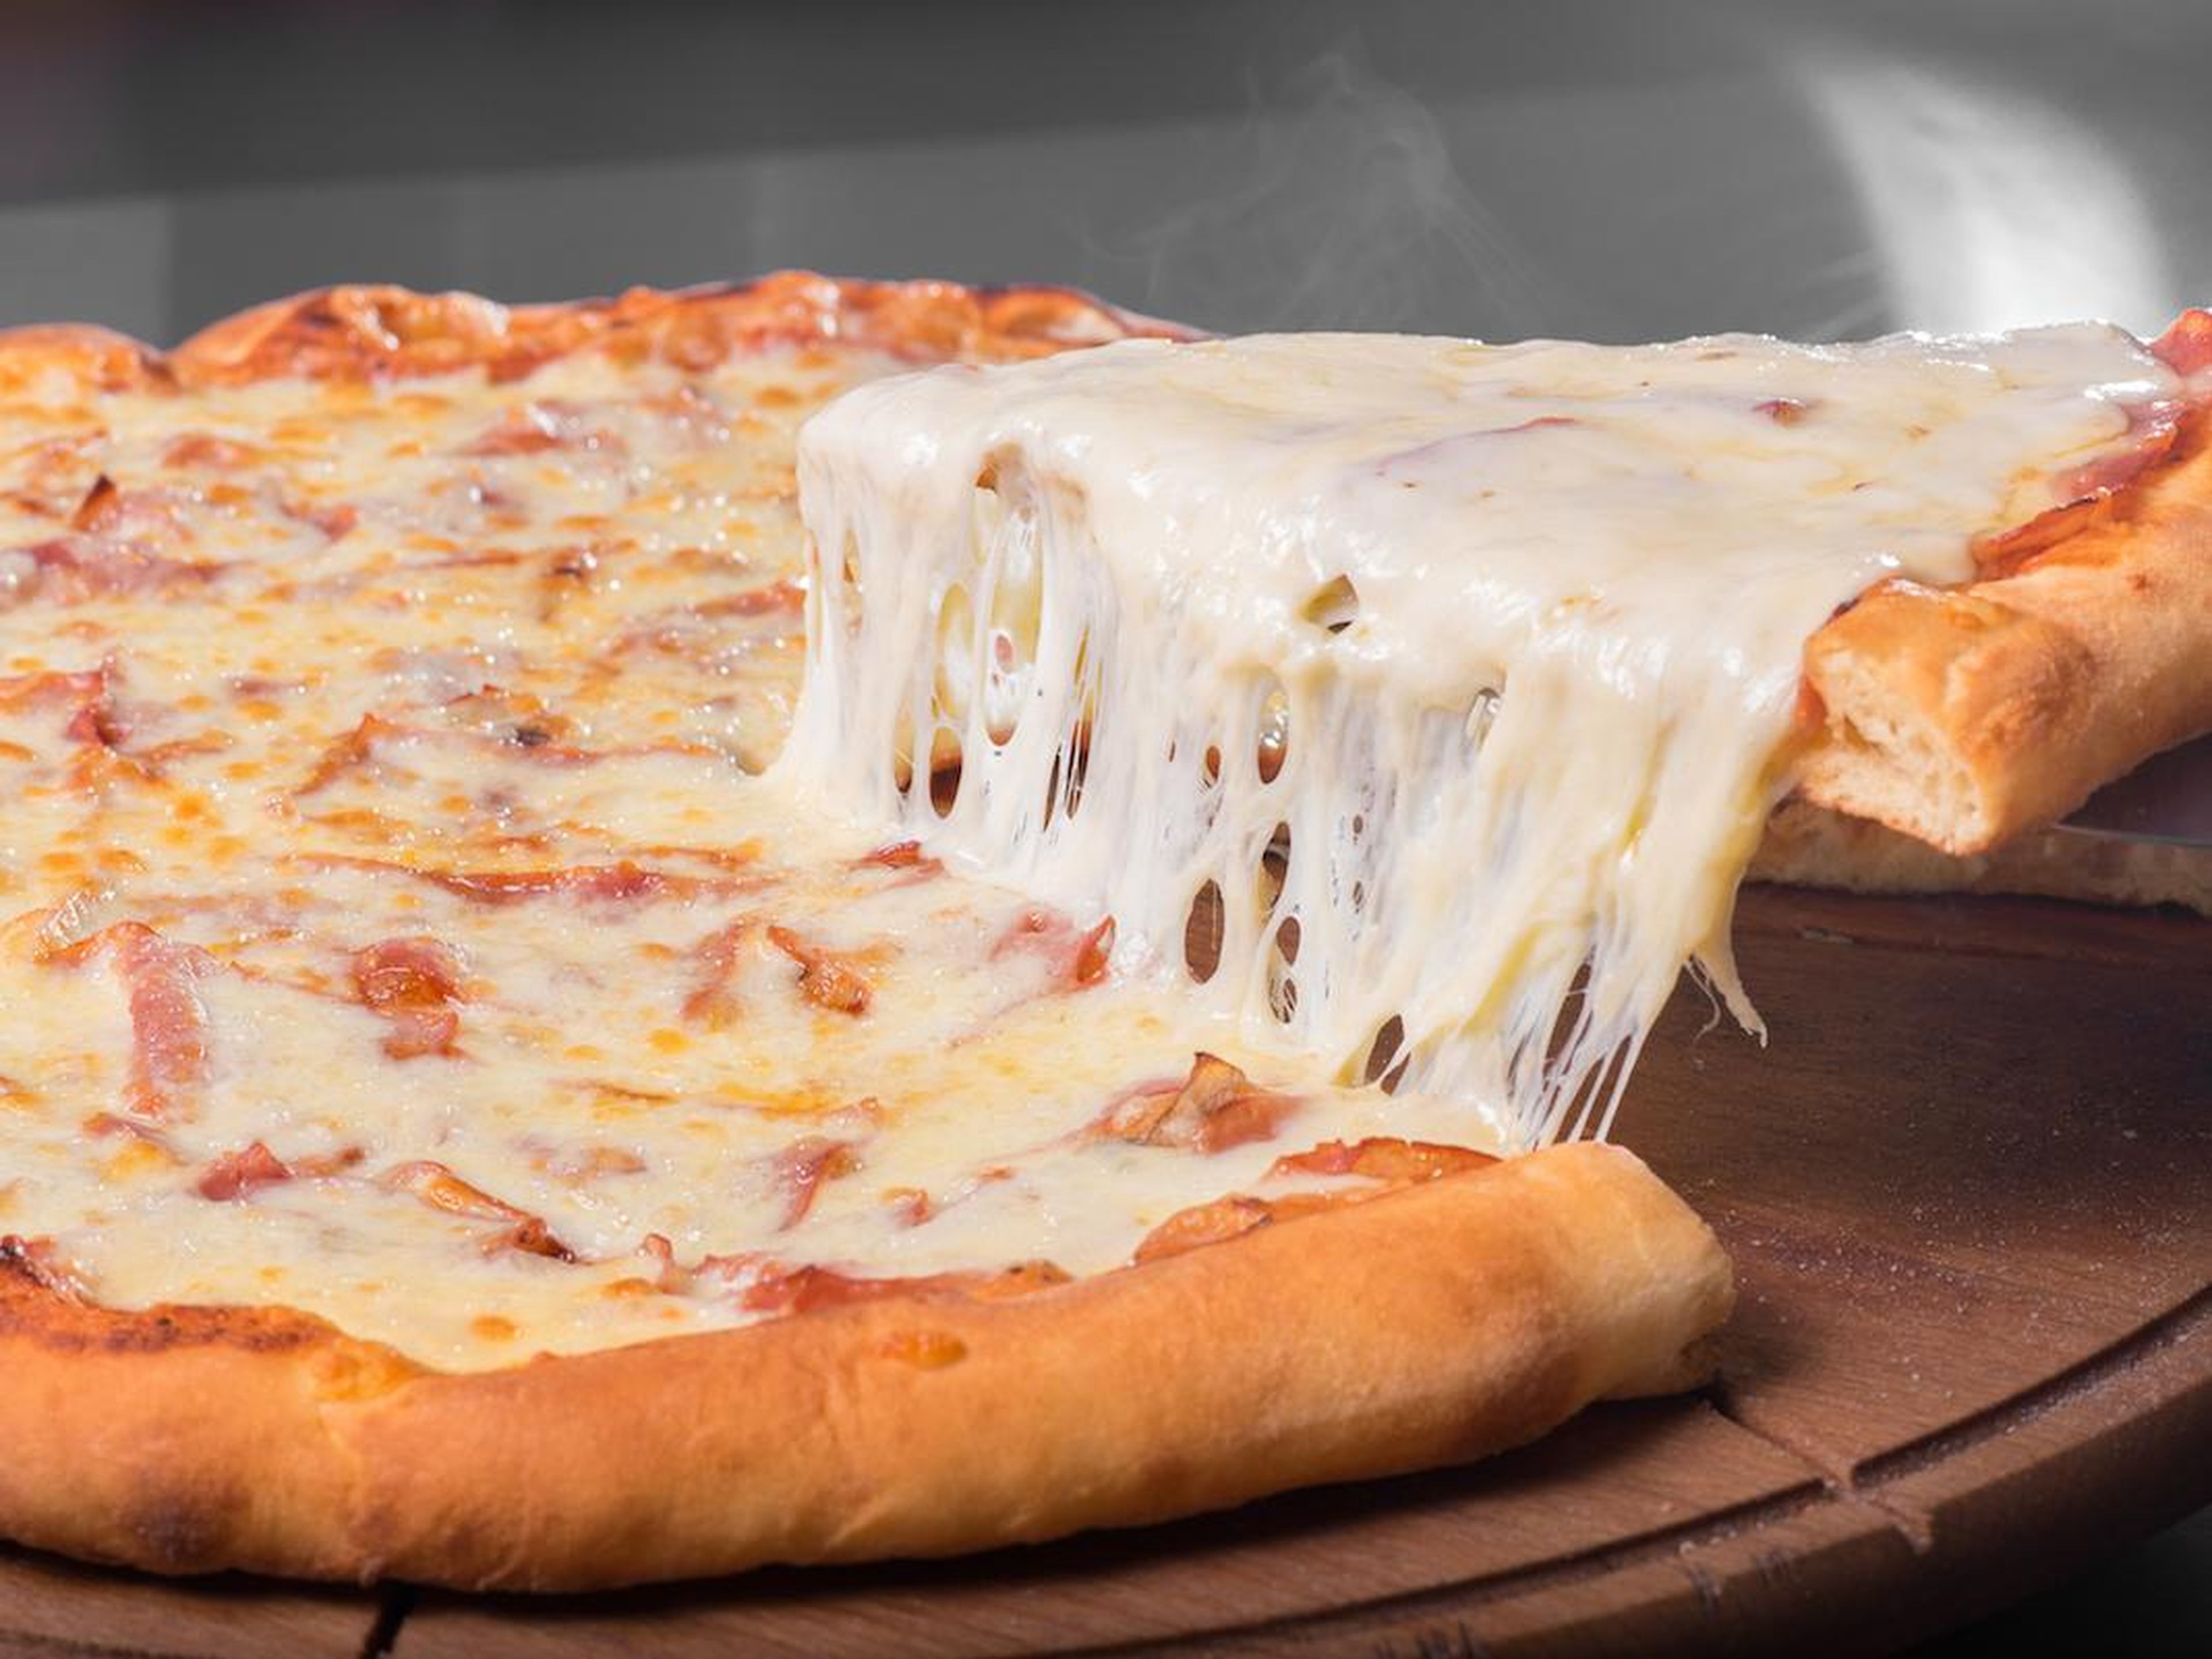 The previous record was a pizza with 111 types of cheese.